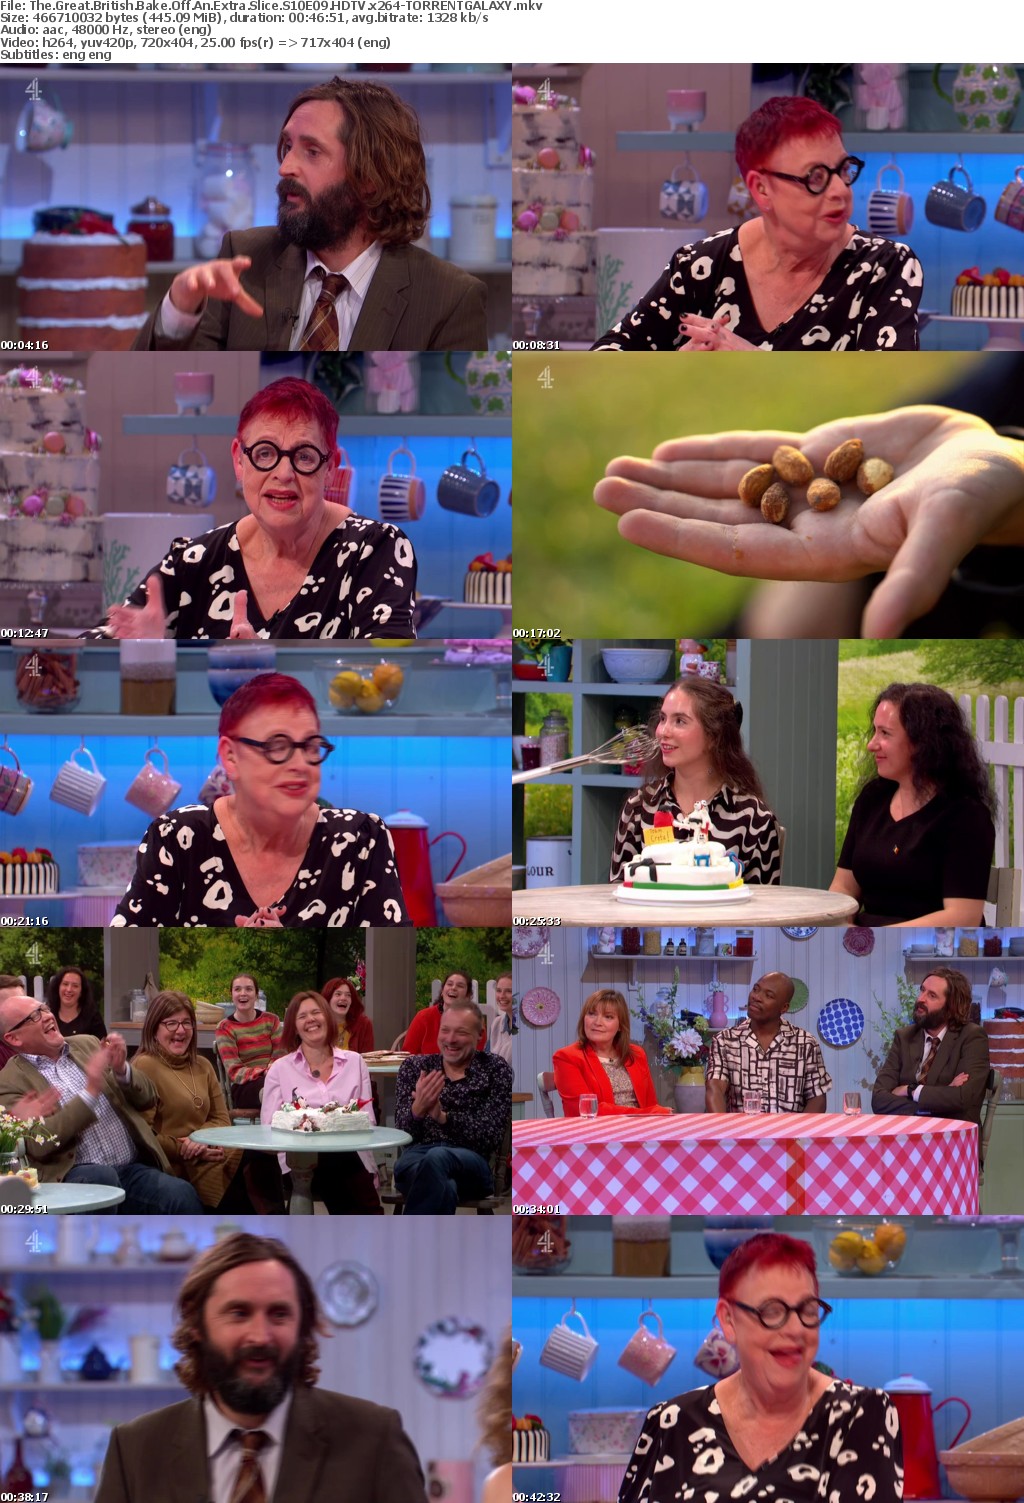 The Great British Bake Off An Extra Slice S10E09 HDTV x264-GALAXY